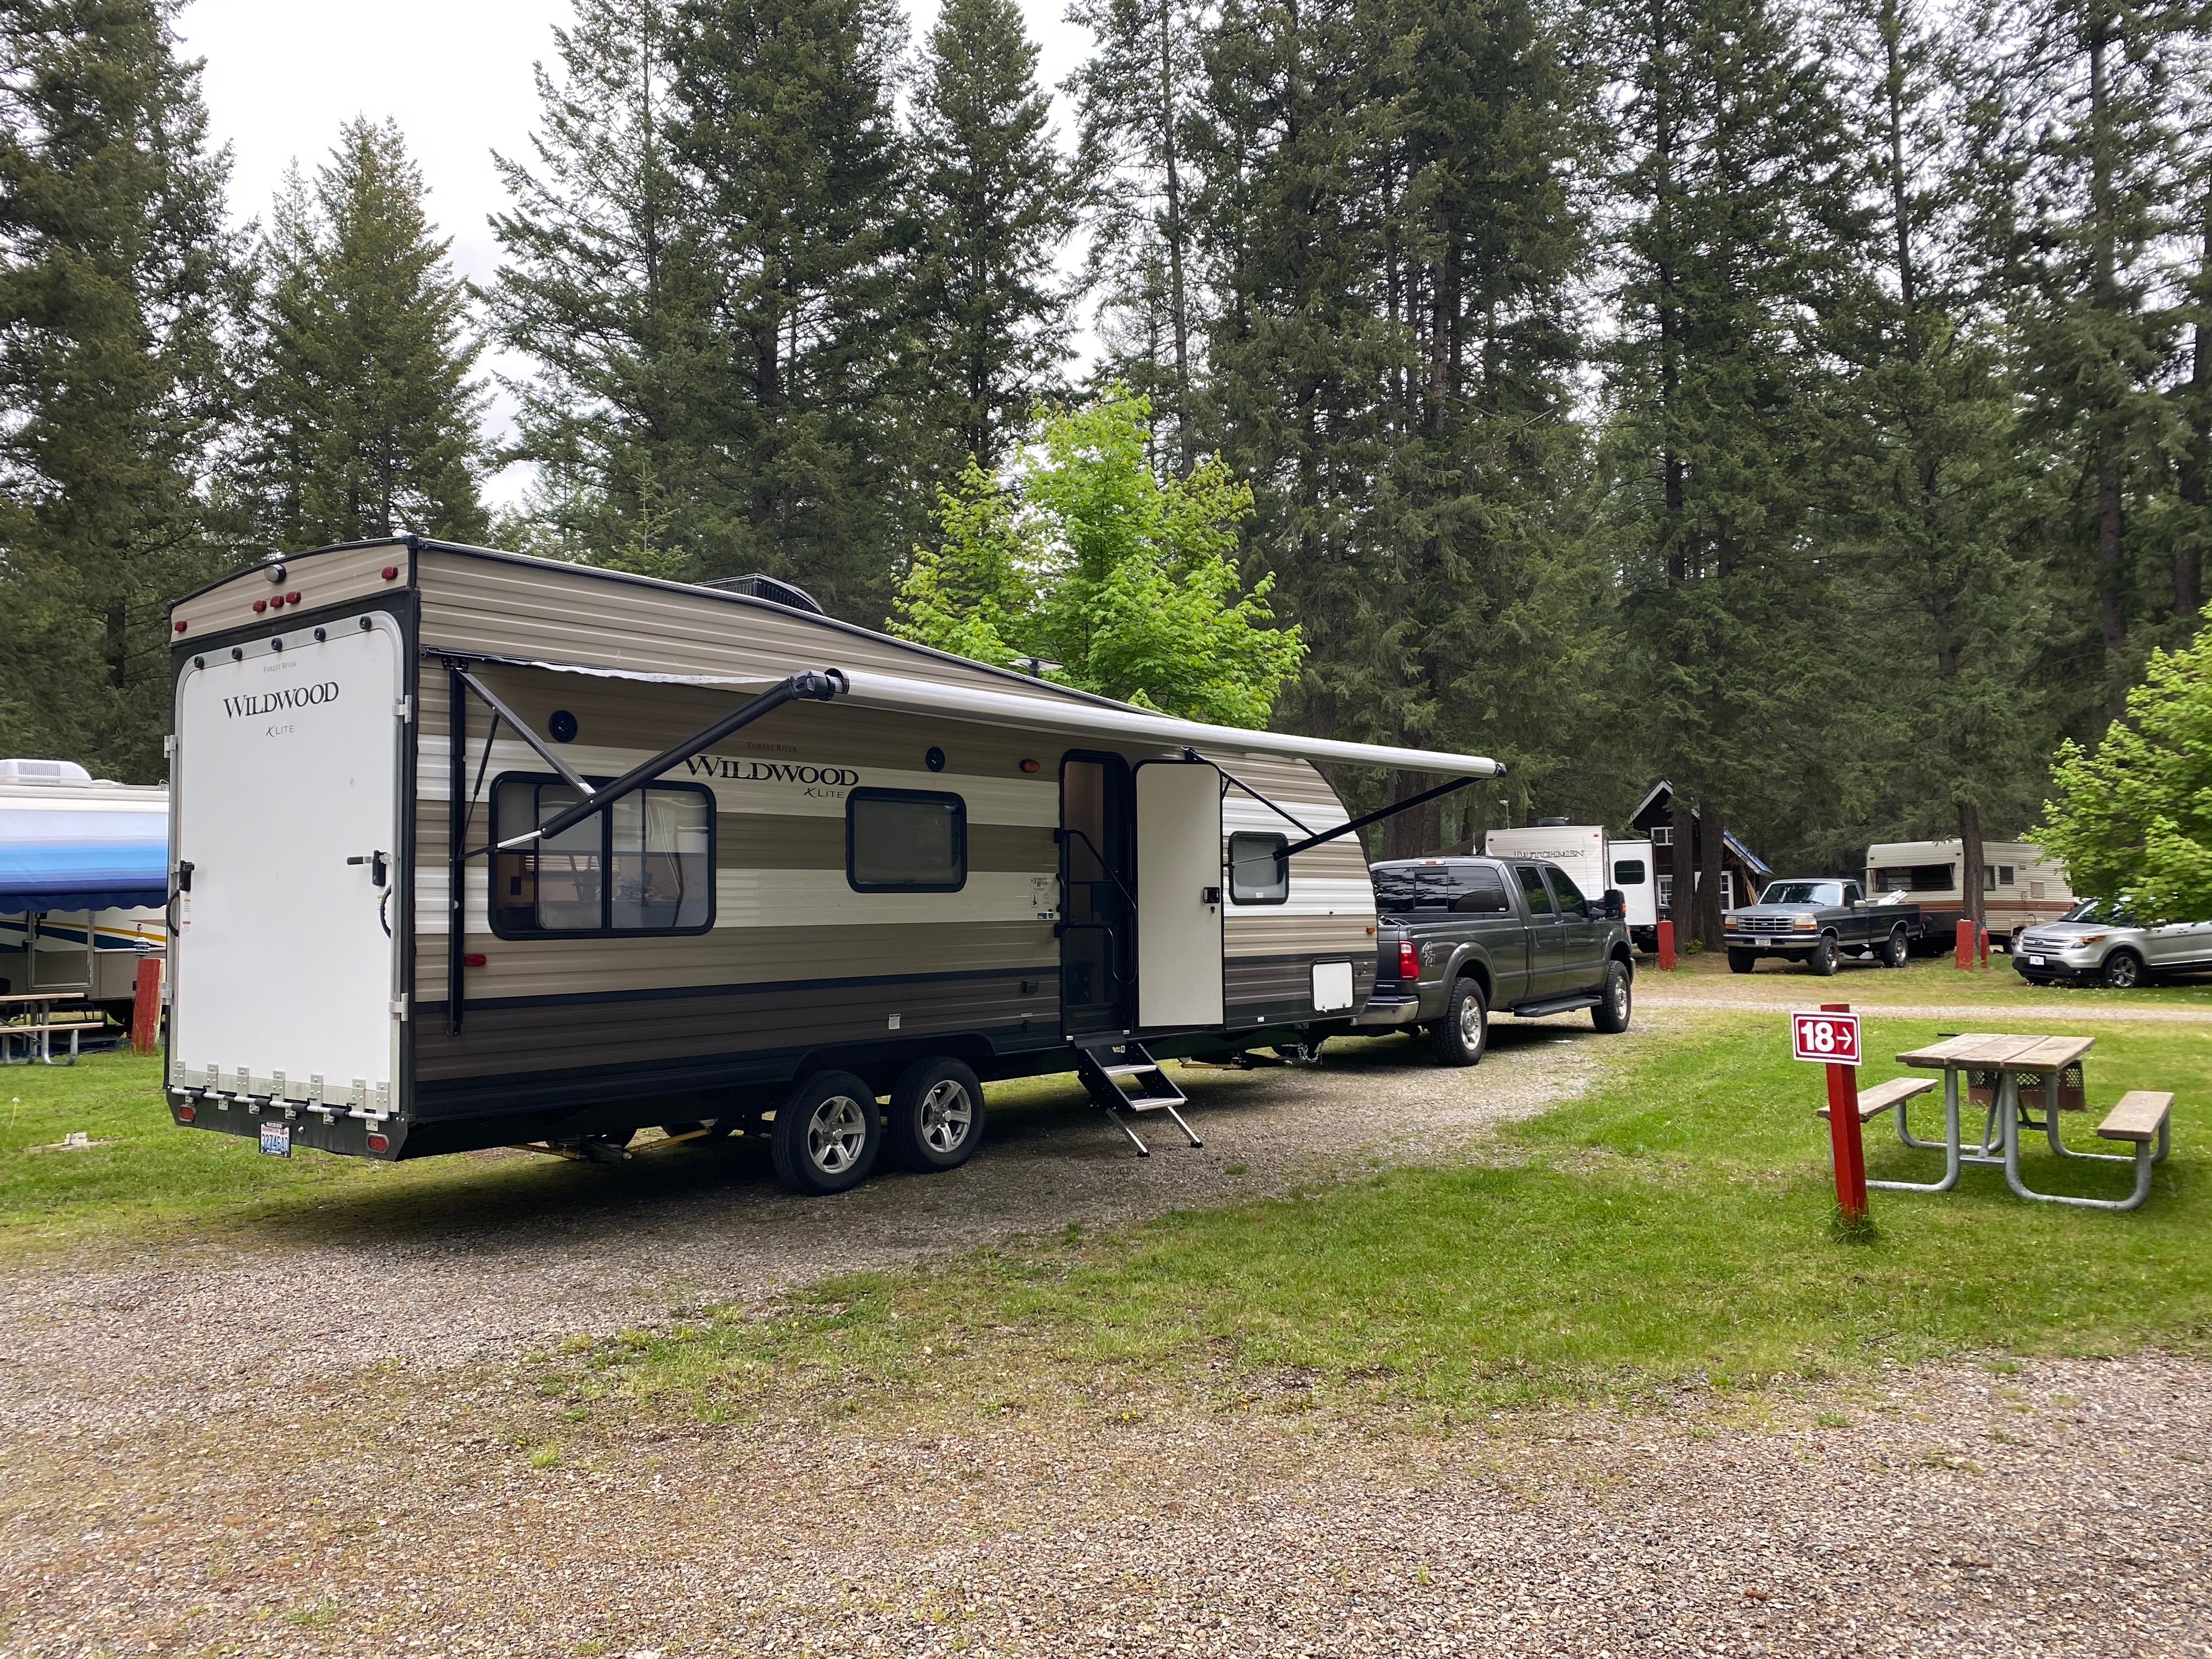 Camper submitted image from Kootenai River Campground - 5